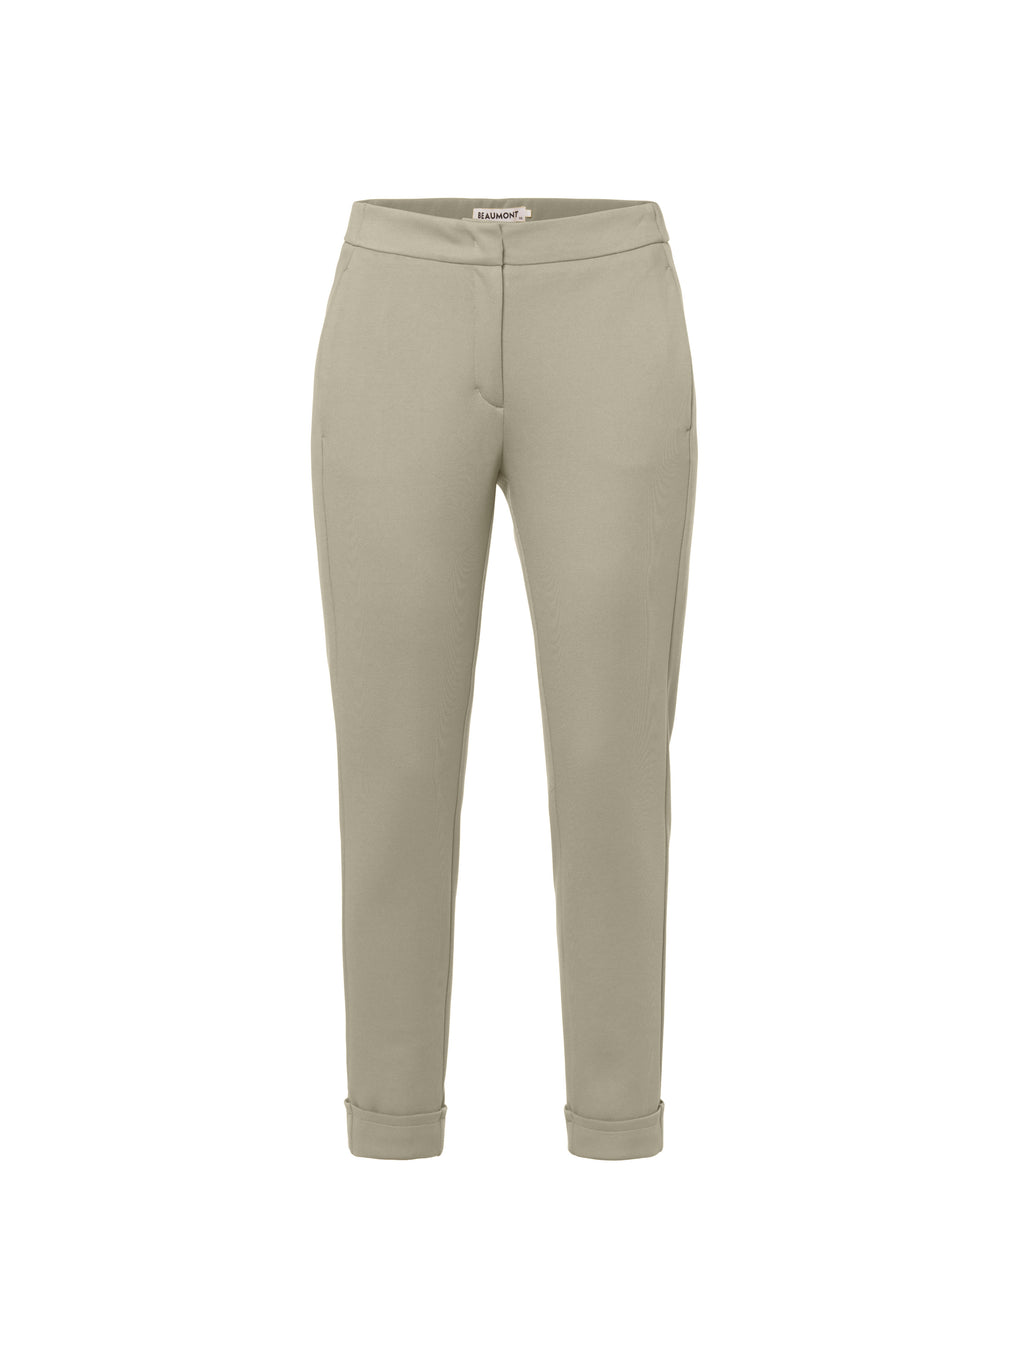 <p><span>Beaumont luxurious leisurewear trousers. Co-ord item.</span></p>